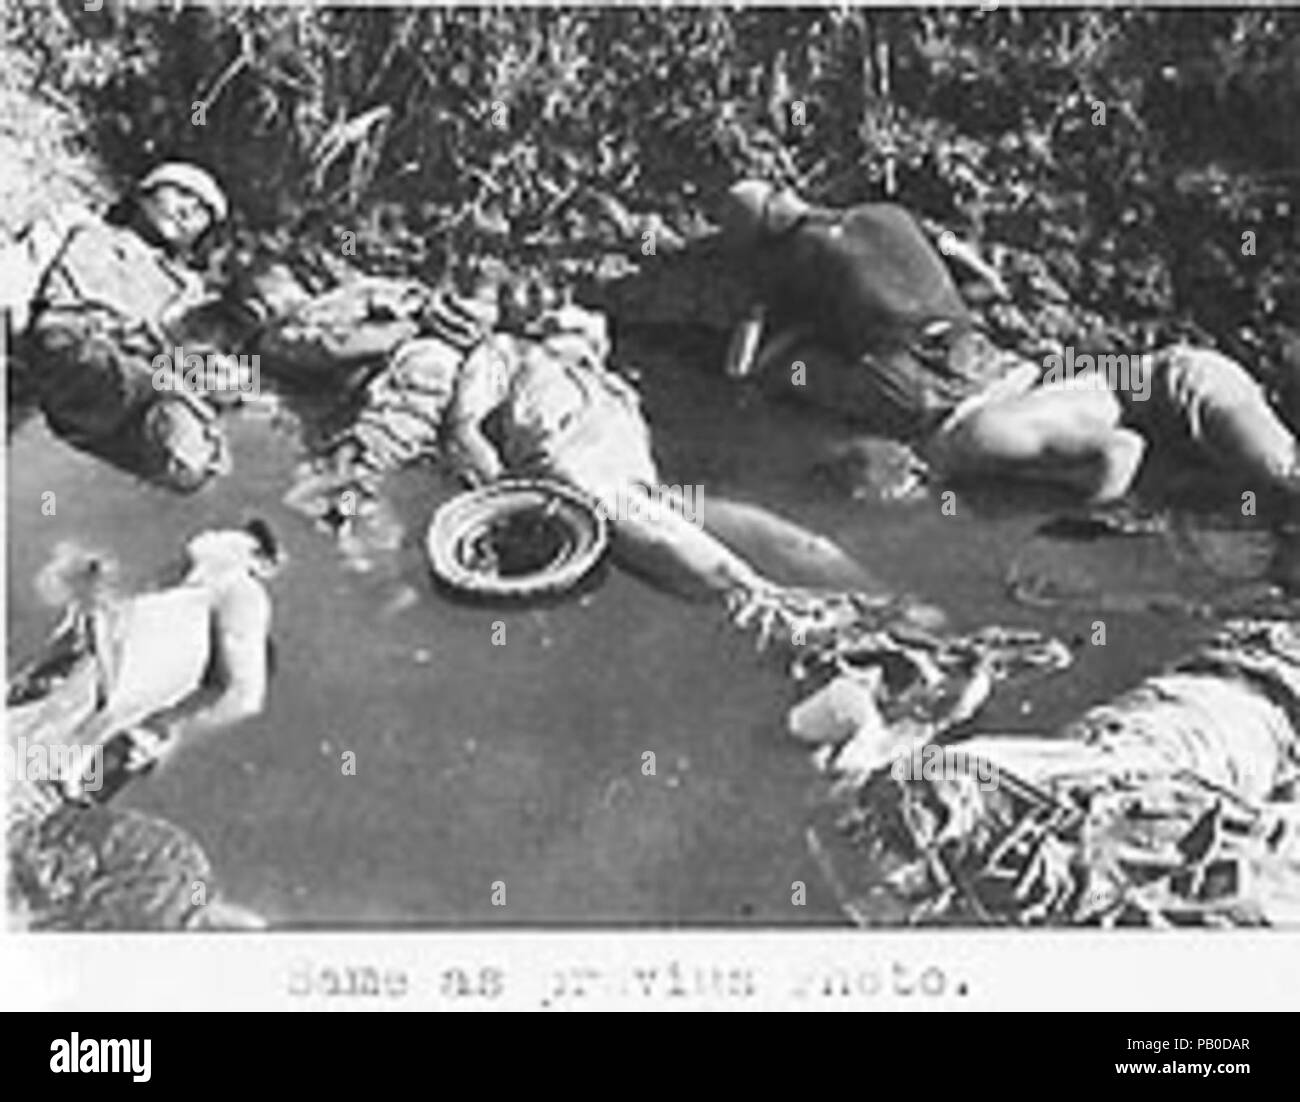 A waterpond filled with the bodies of executed Chinese soldiers who got safety promise by Japanese (b) Nanjing Massacre. Stock Photo